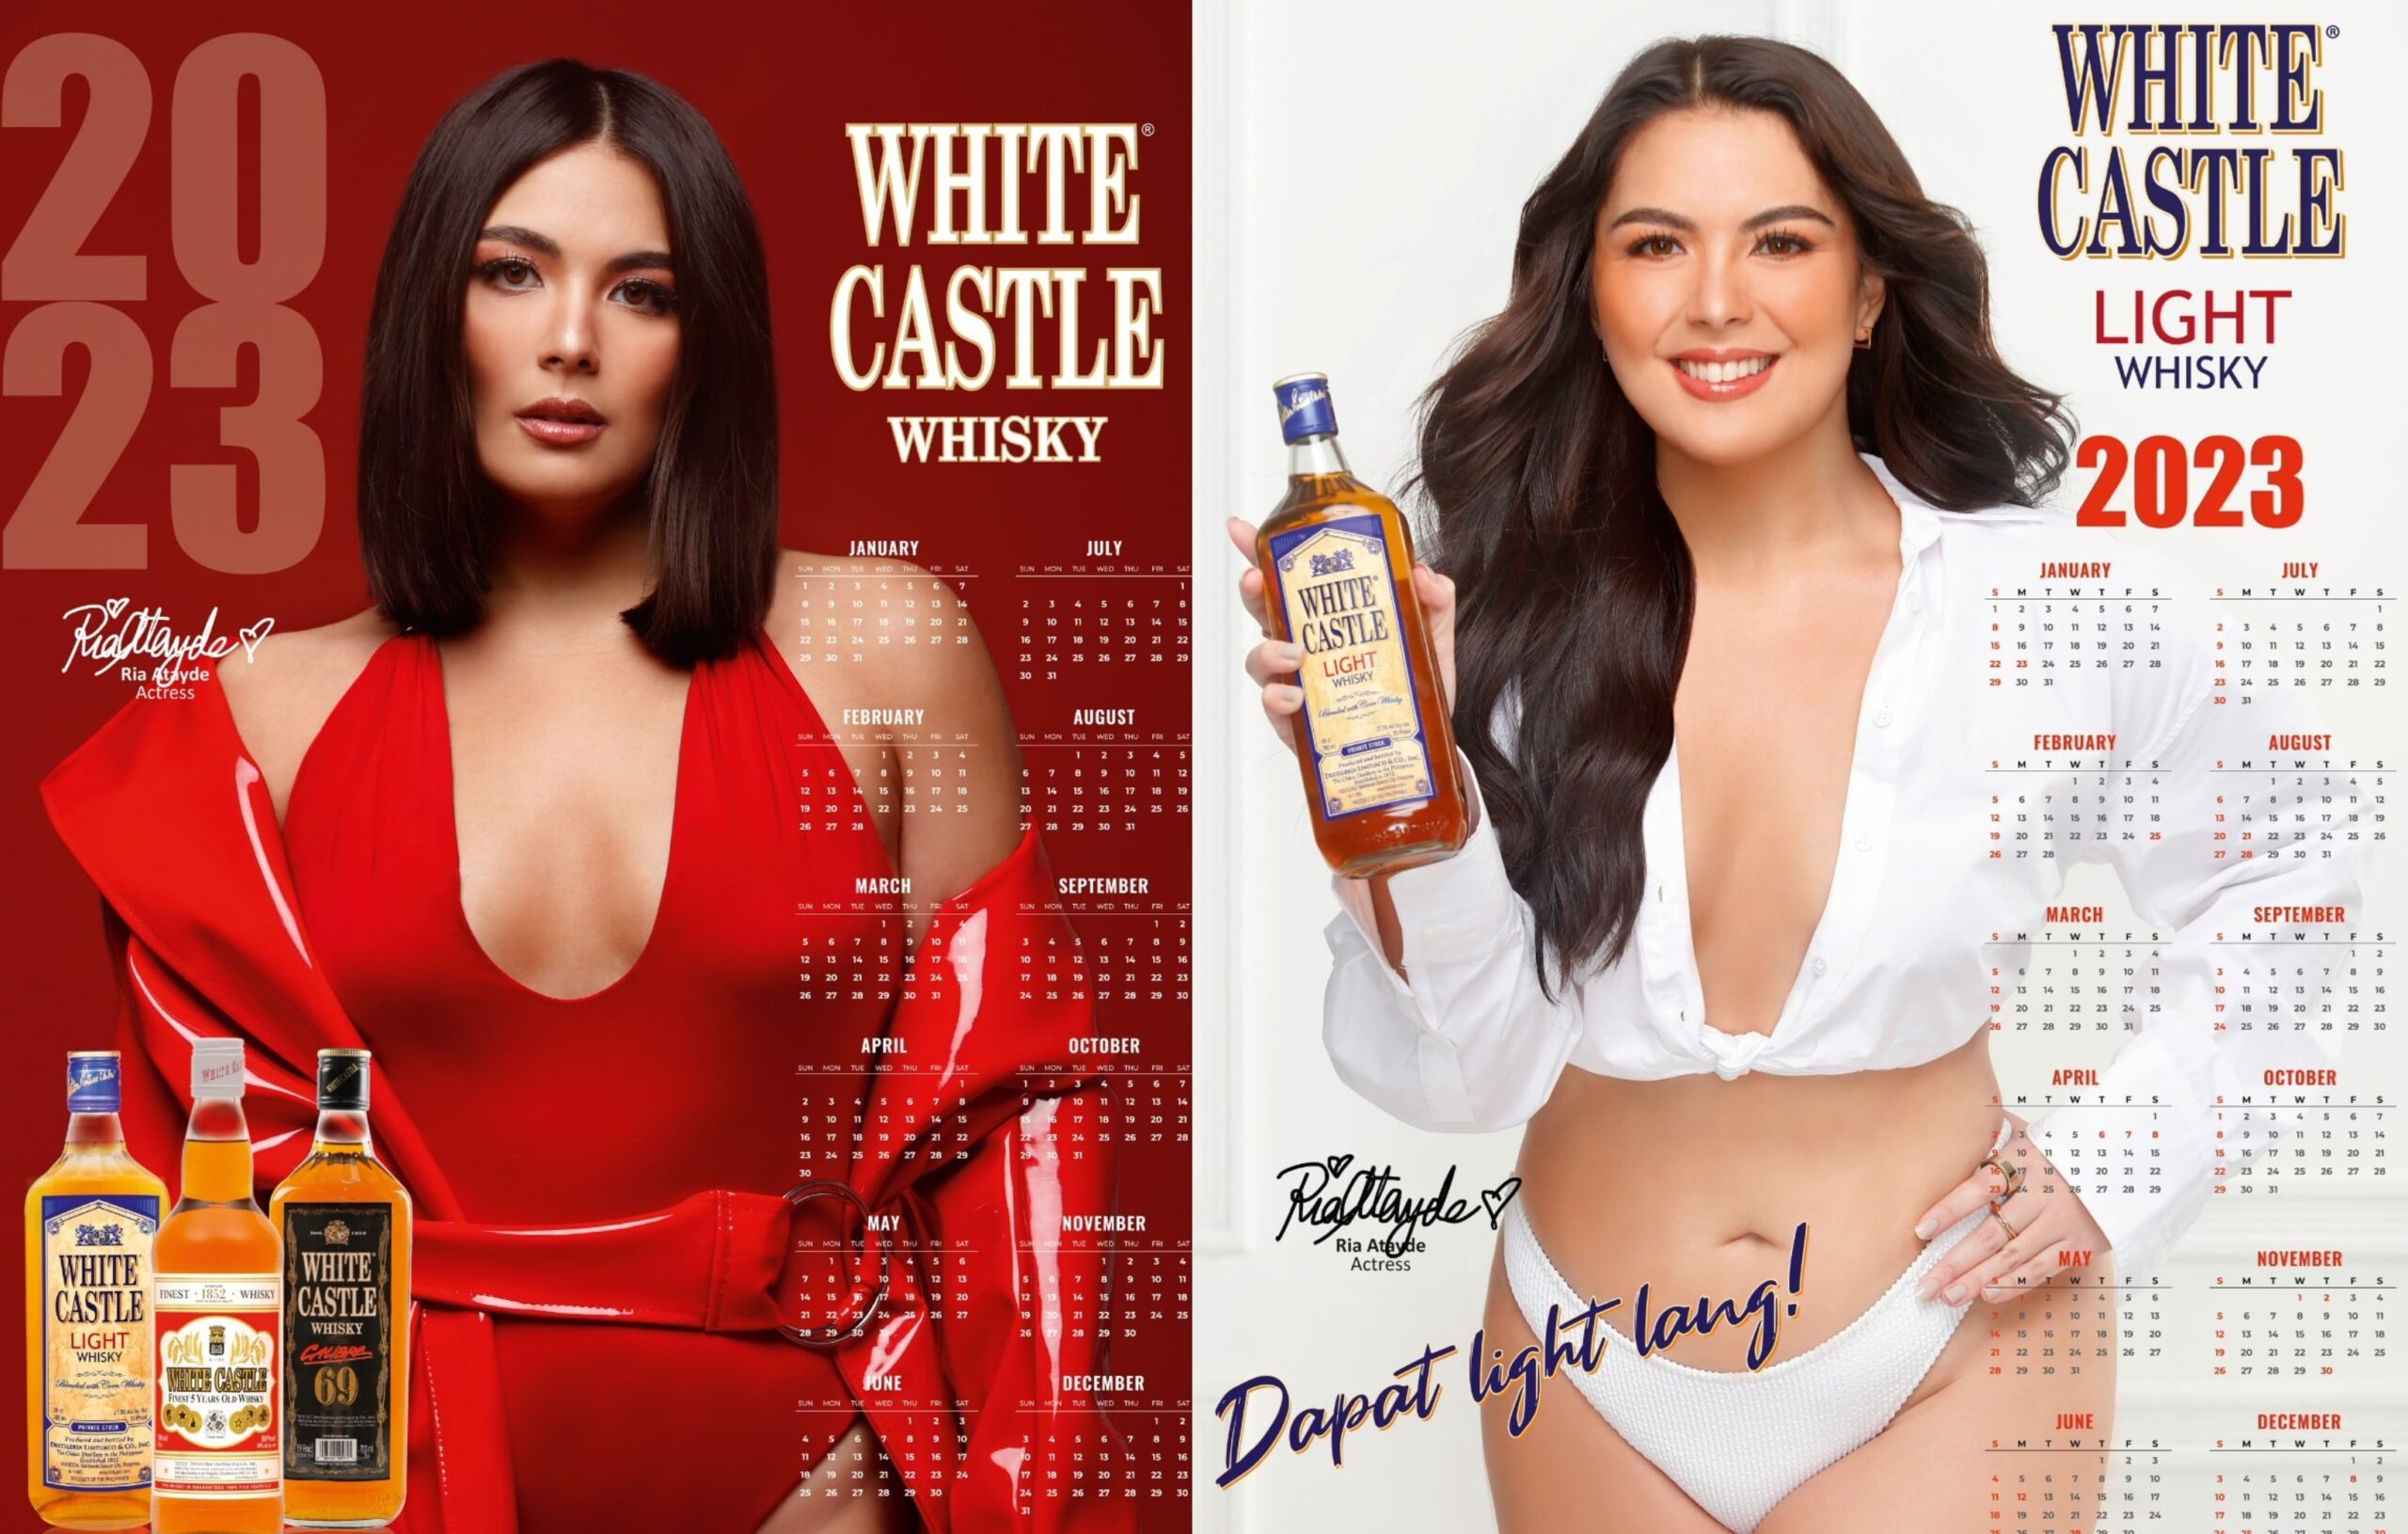 ‘Beauty goes in all forms and sizes’: Ria Atayde is White Castle Whisky’s 2023 calendar girl 